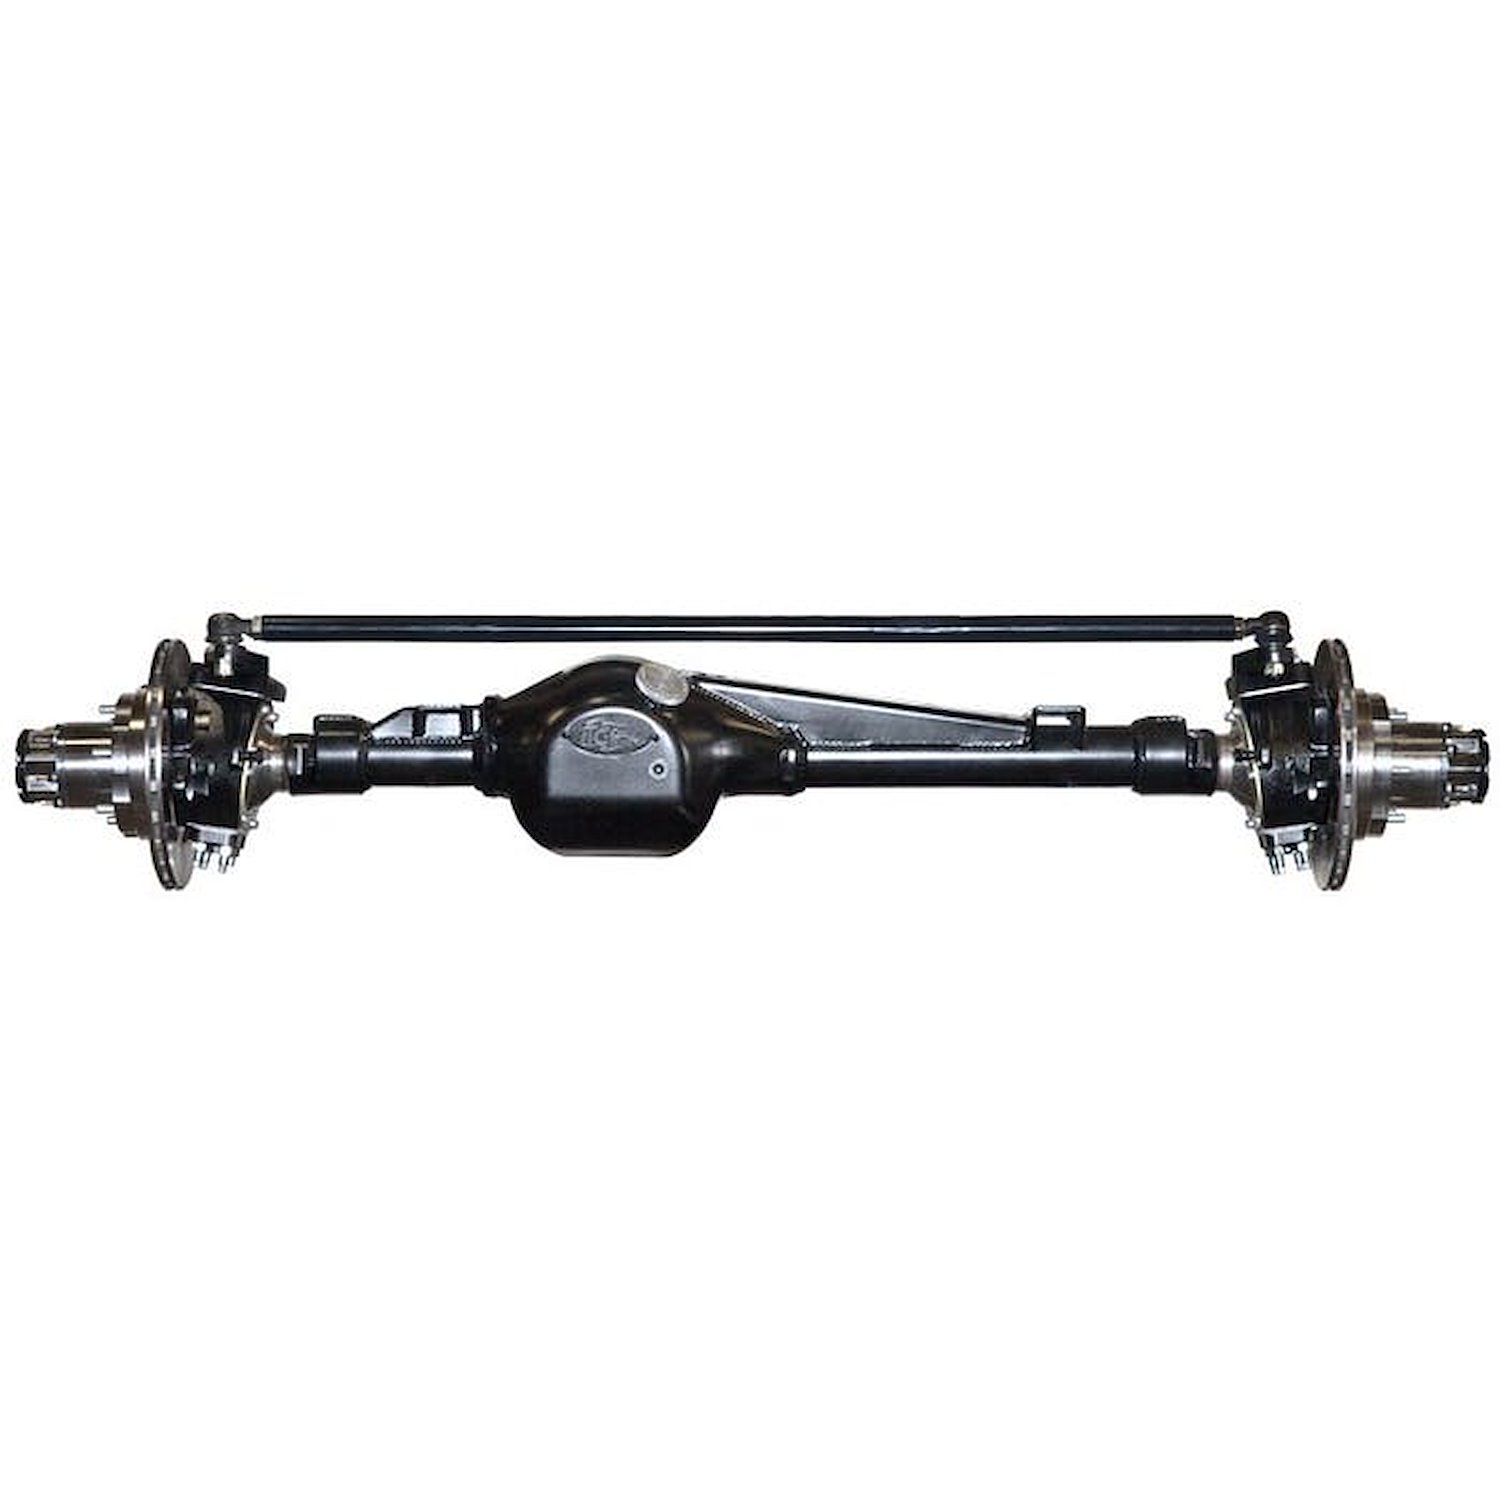 301653-1-KIT Rock Assault Fully-Built Front Axles, +5 Width, RHD, V6, 5.29, Grizzly, Locking Hubs, Toyota